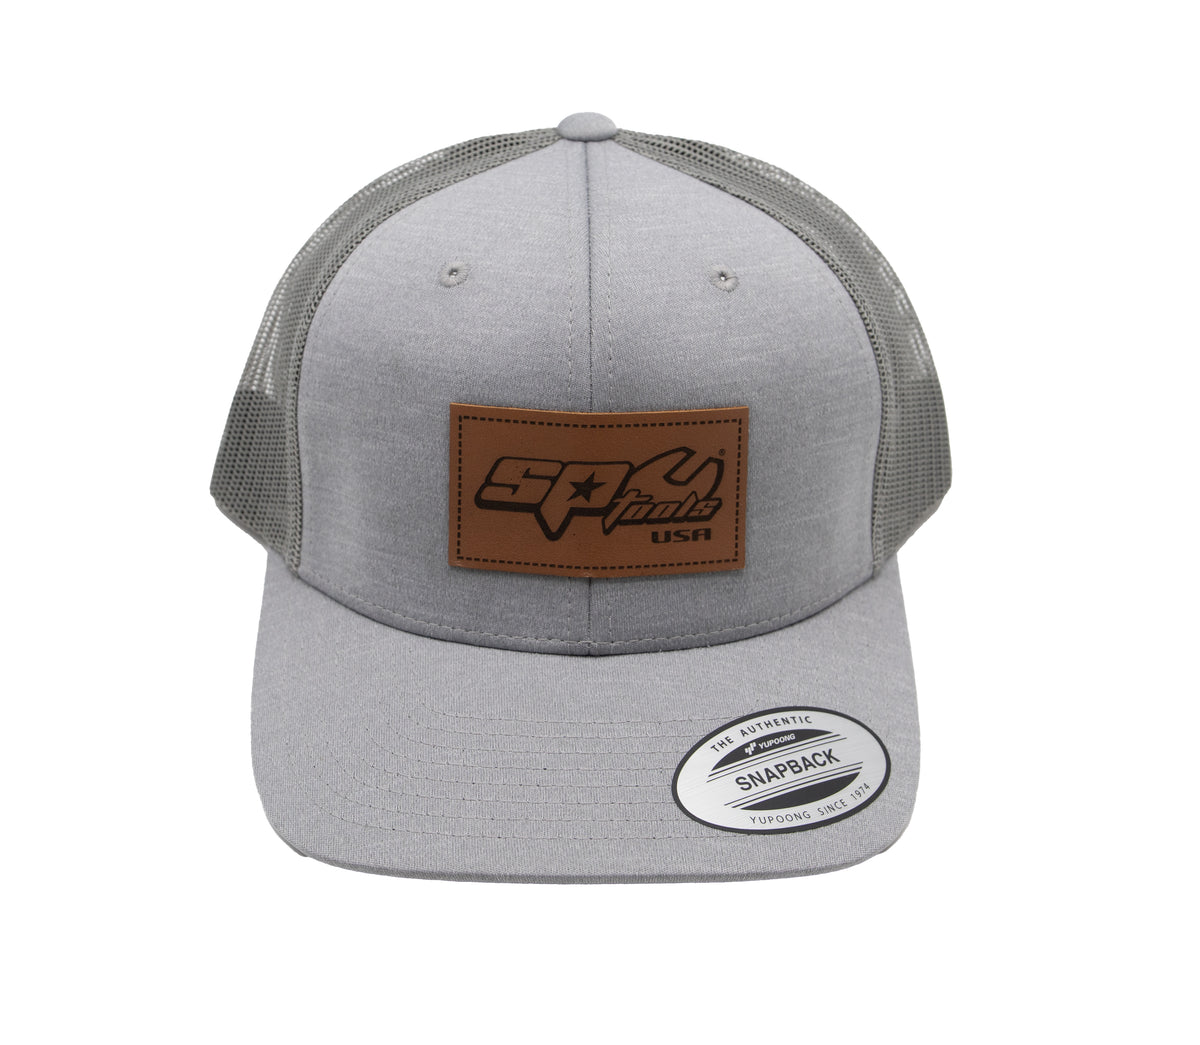 SP TOOLS LEATHER PATCH SNAPBACK